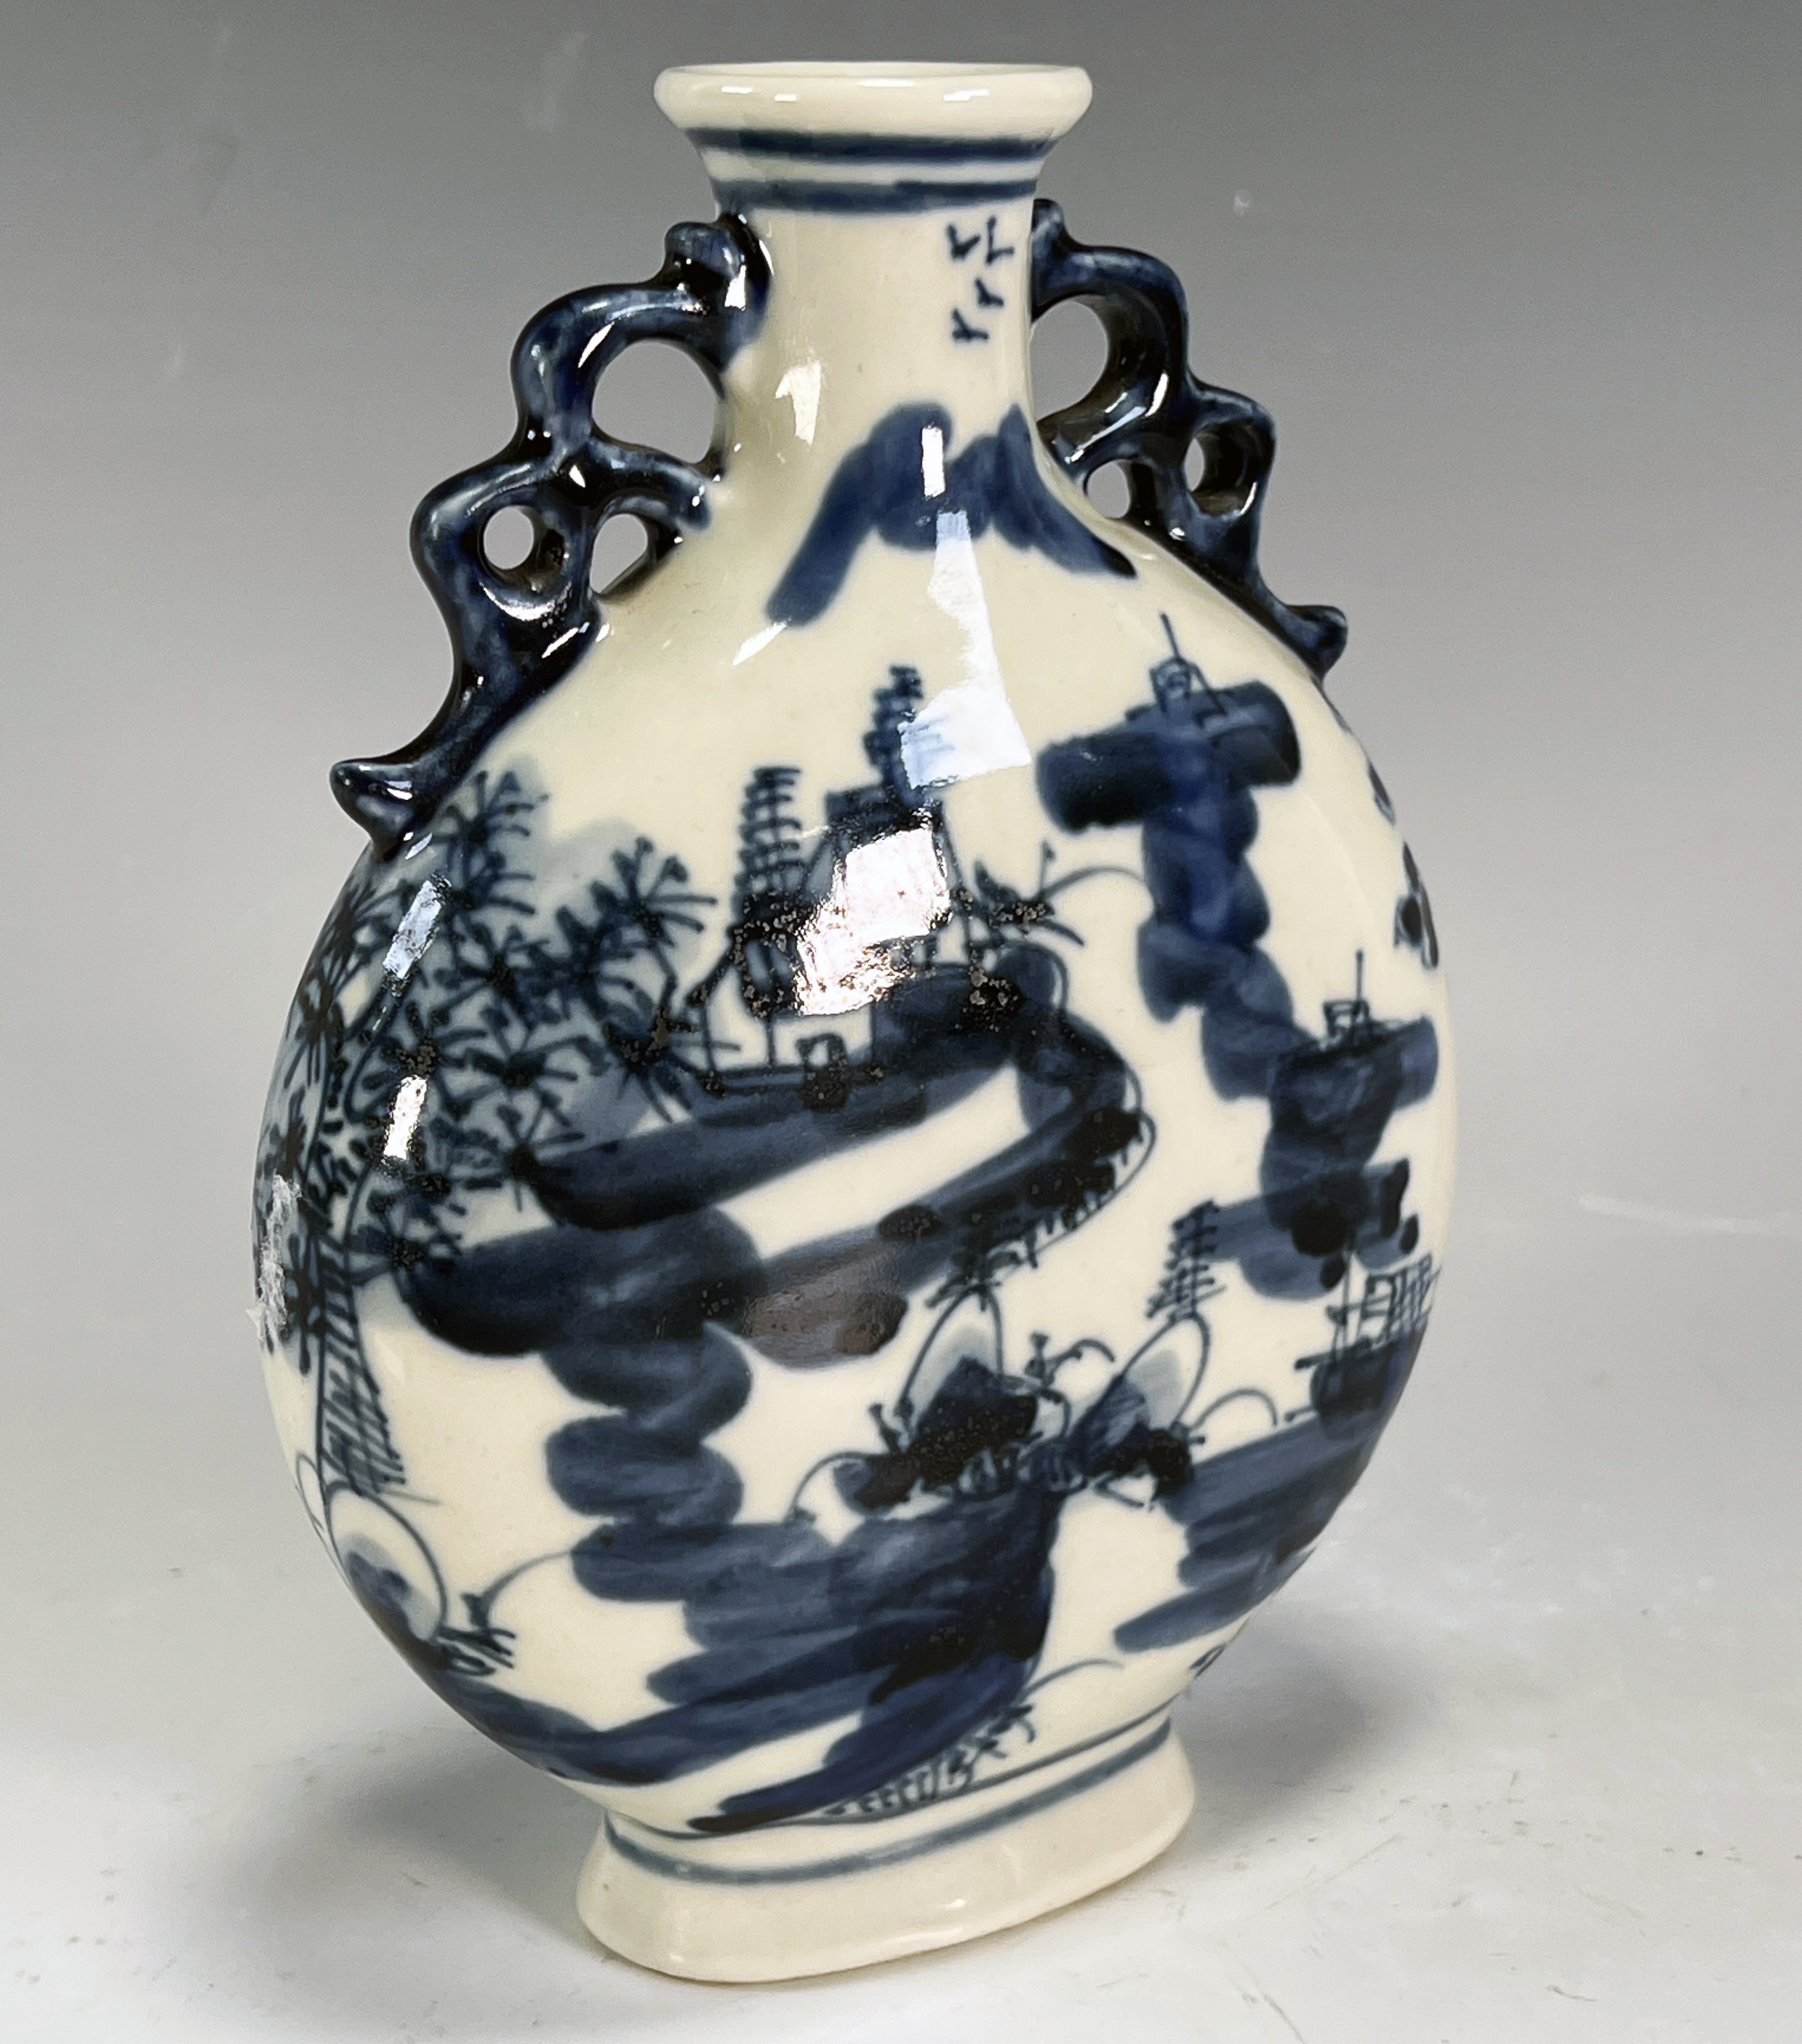 Exquisite Blue & White Chinese Moonflask Vase - 6.5 Inches image 2